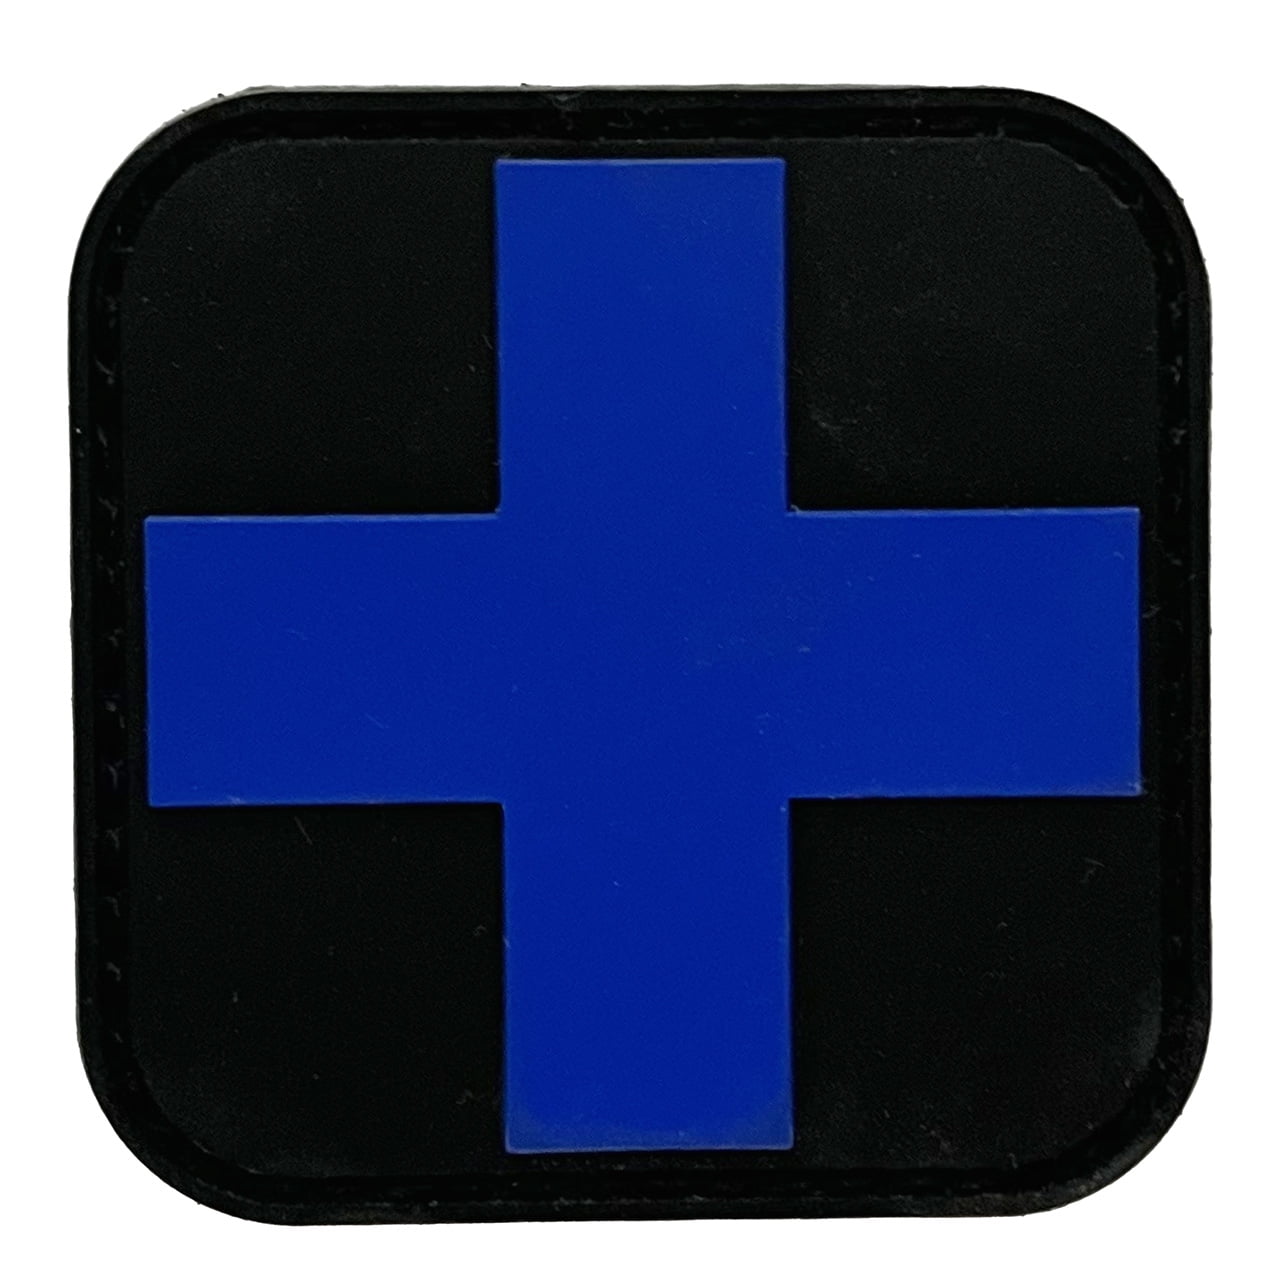 Rescue Essentials PVC Cross Patch, Velcro-Backed - Blue on Black 